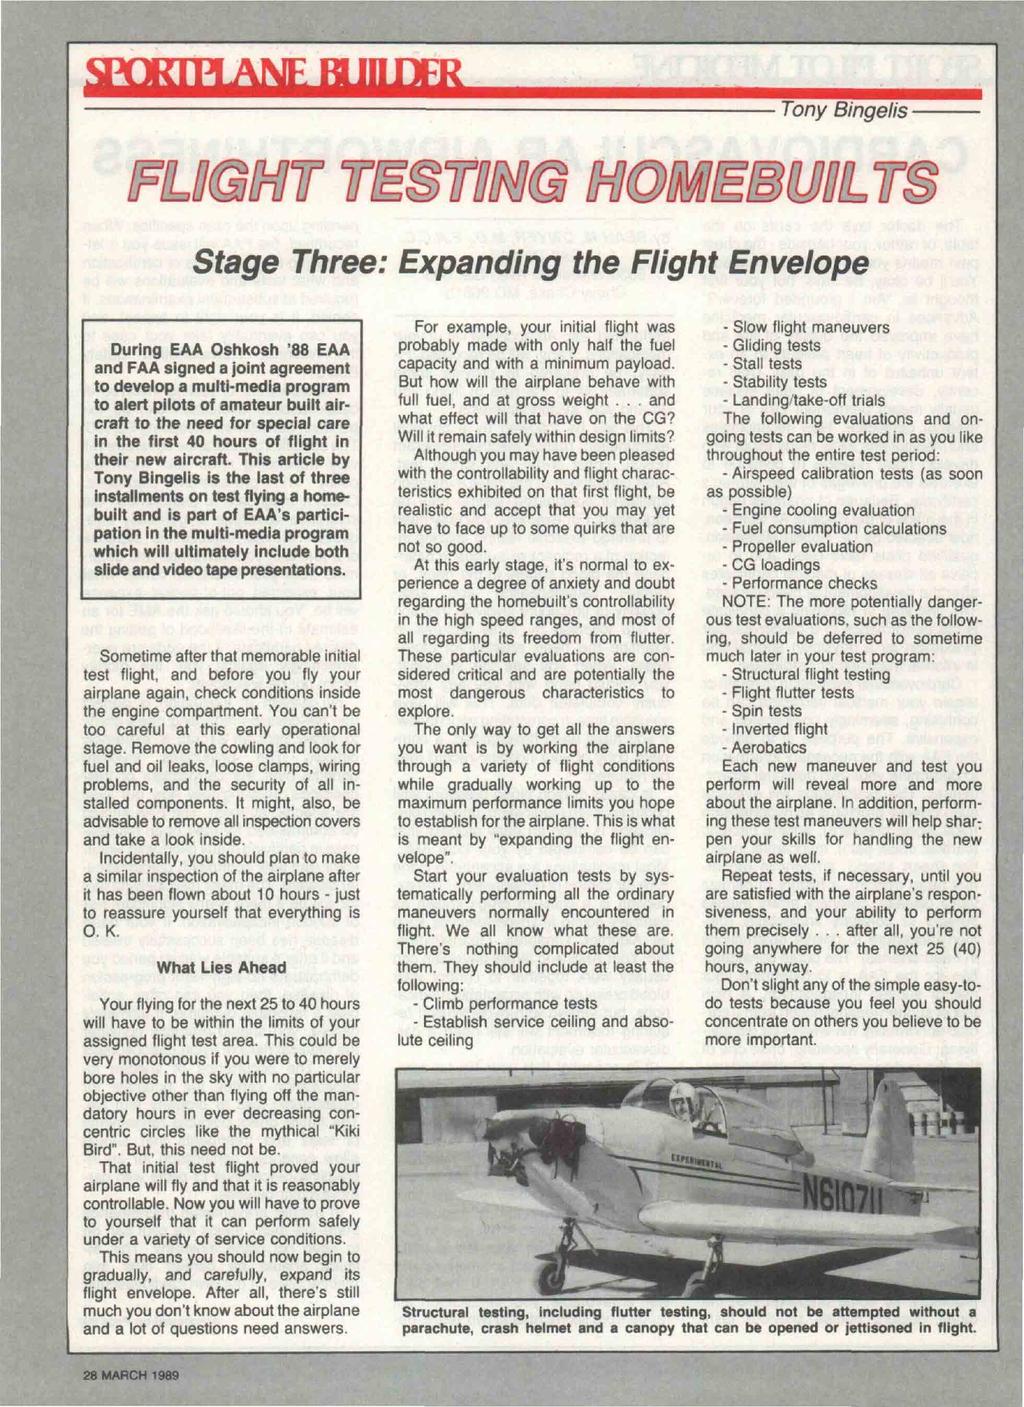 Tony Bingelis Stage Three: Expanding the Flight Envelope During EAA Oshkosh '88 EAA and FAA signed a joint agreement to develop a multi-media program to alert pilots of amateur built aircraft to the